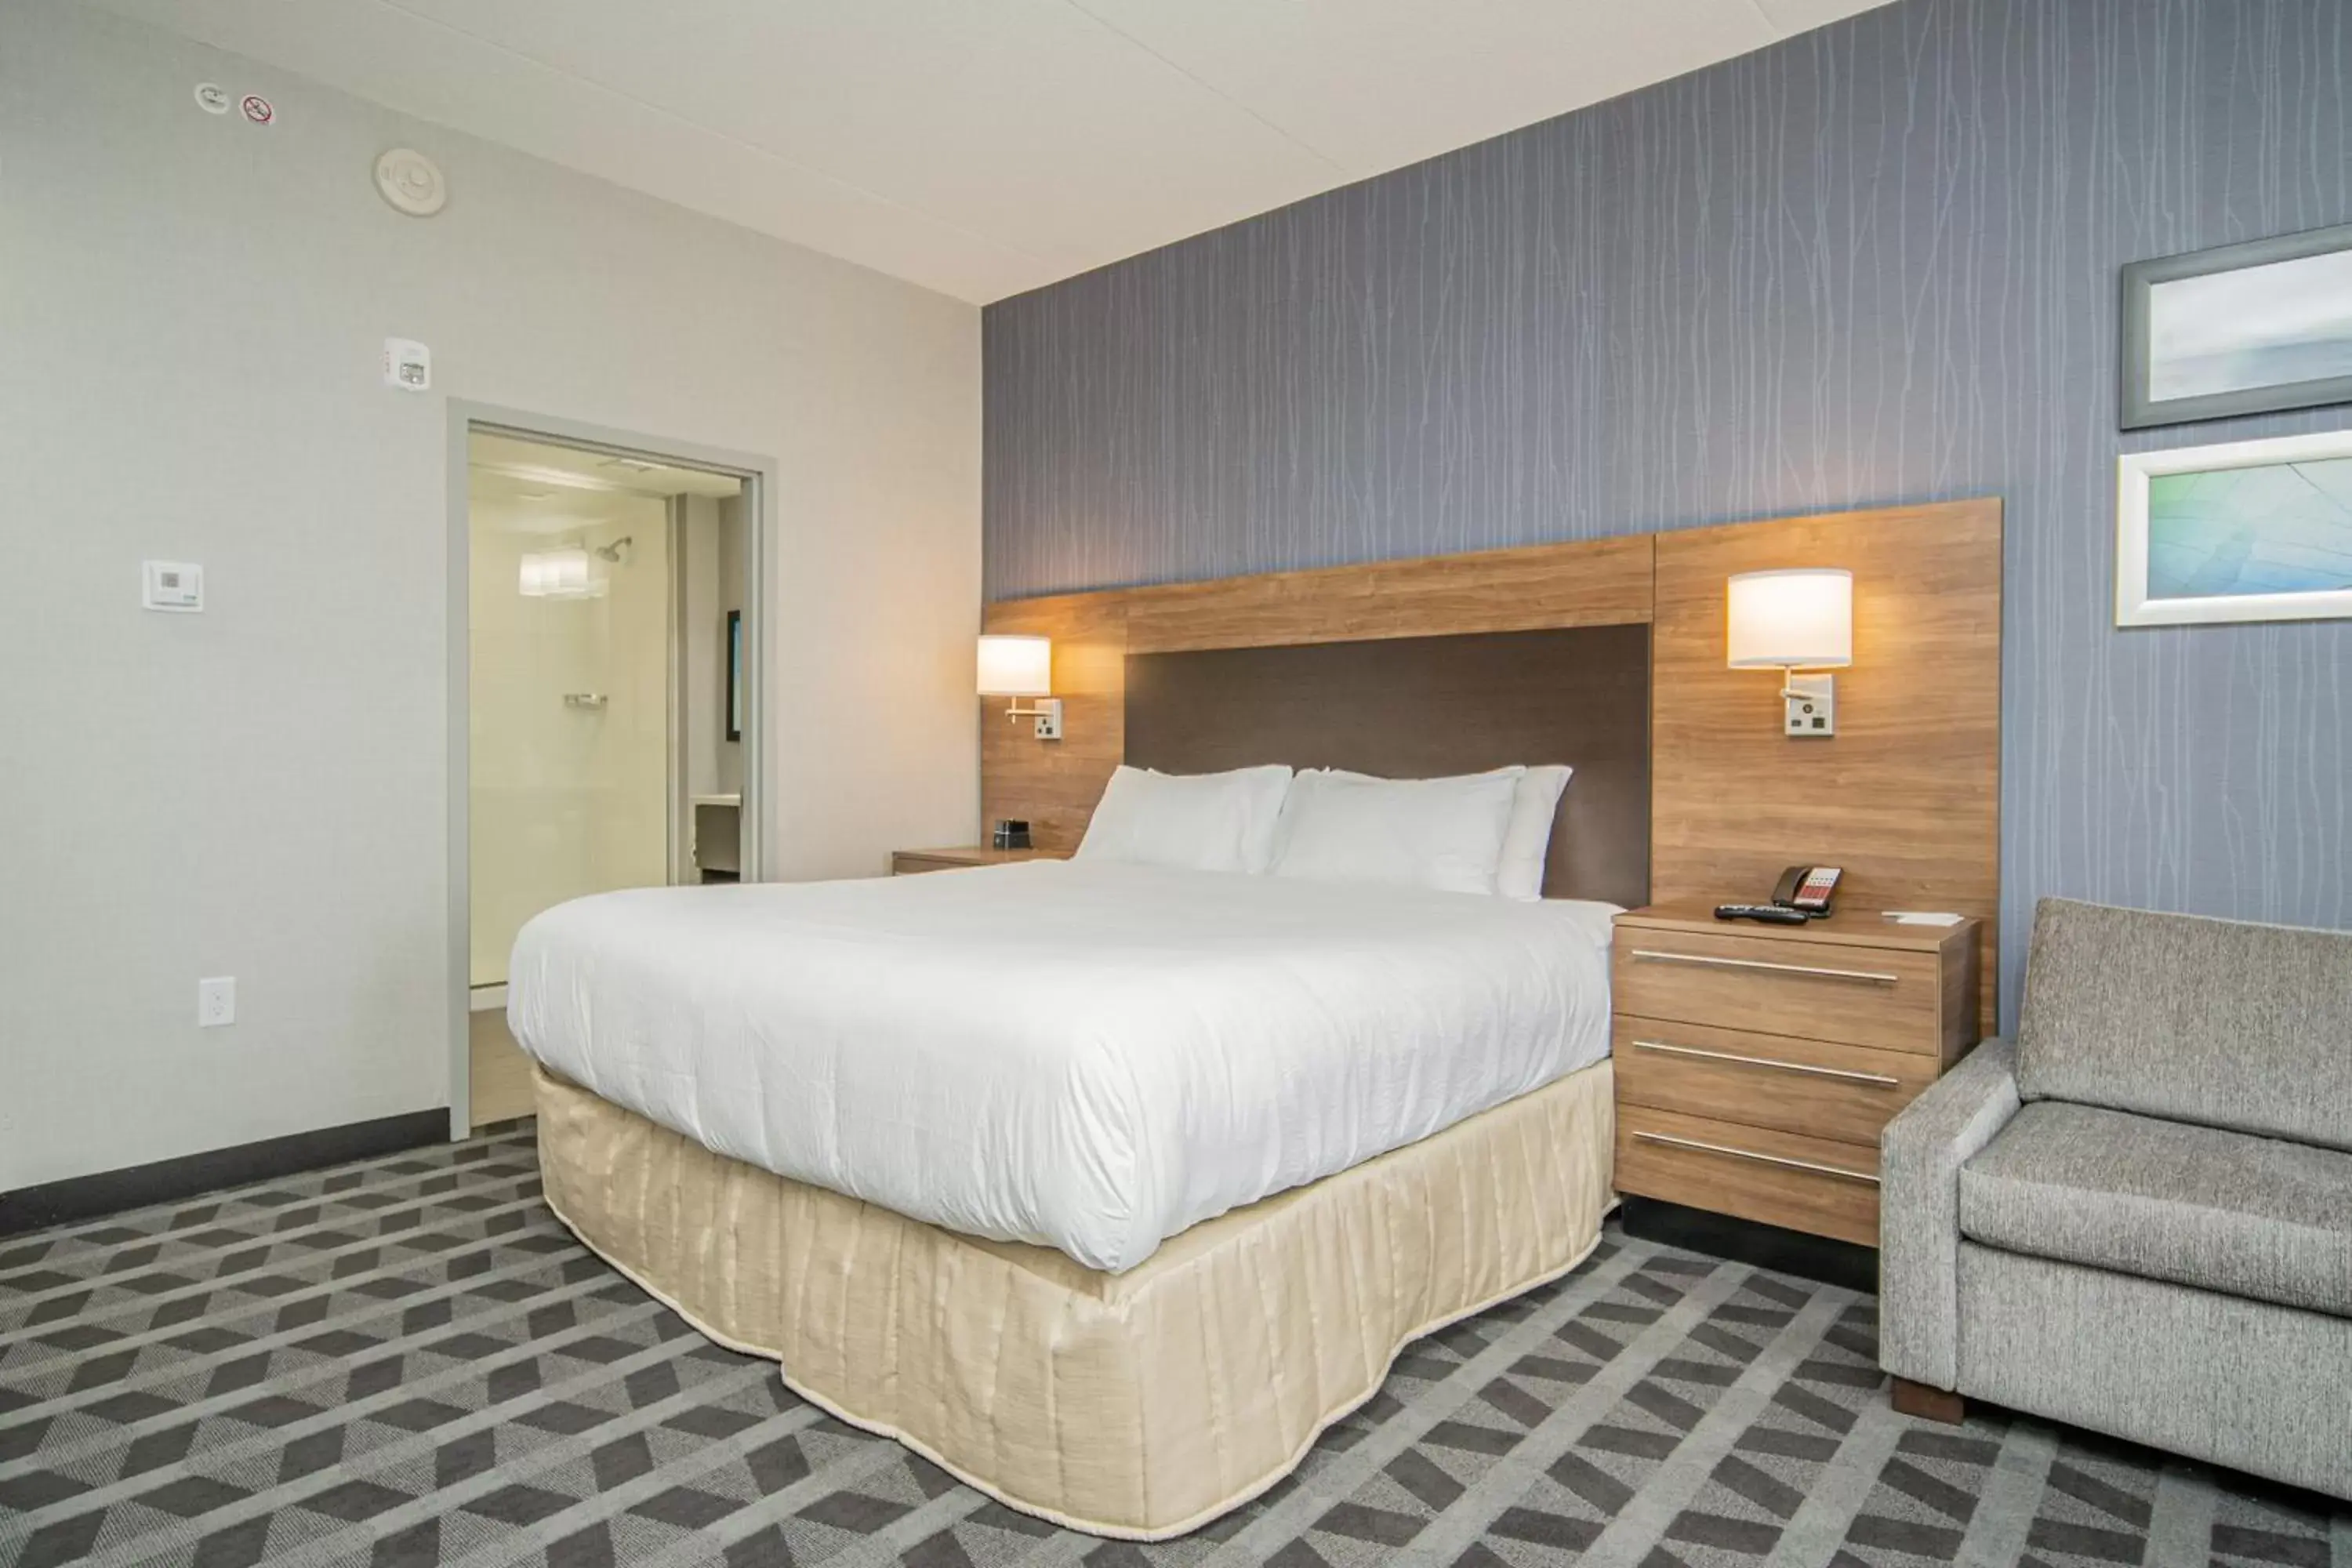 Bed, Room Photo in TownePlace Suites by Marriott Brantford and Conference Centre